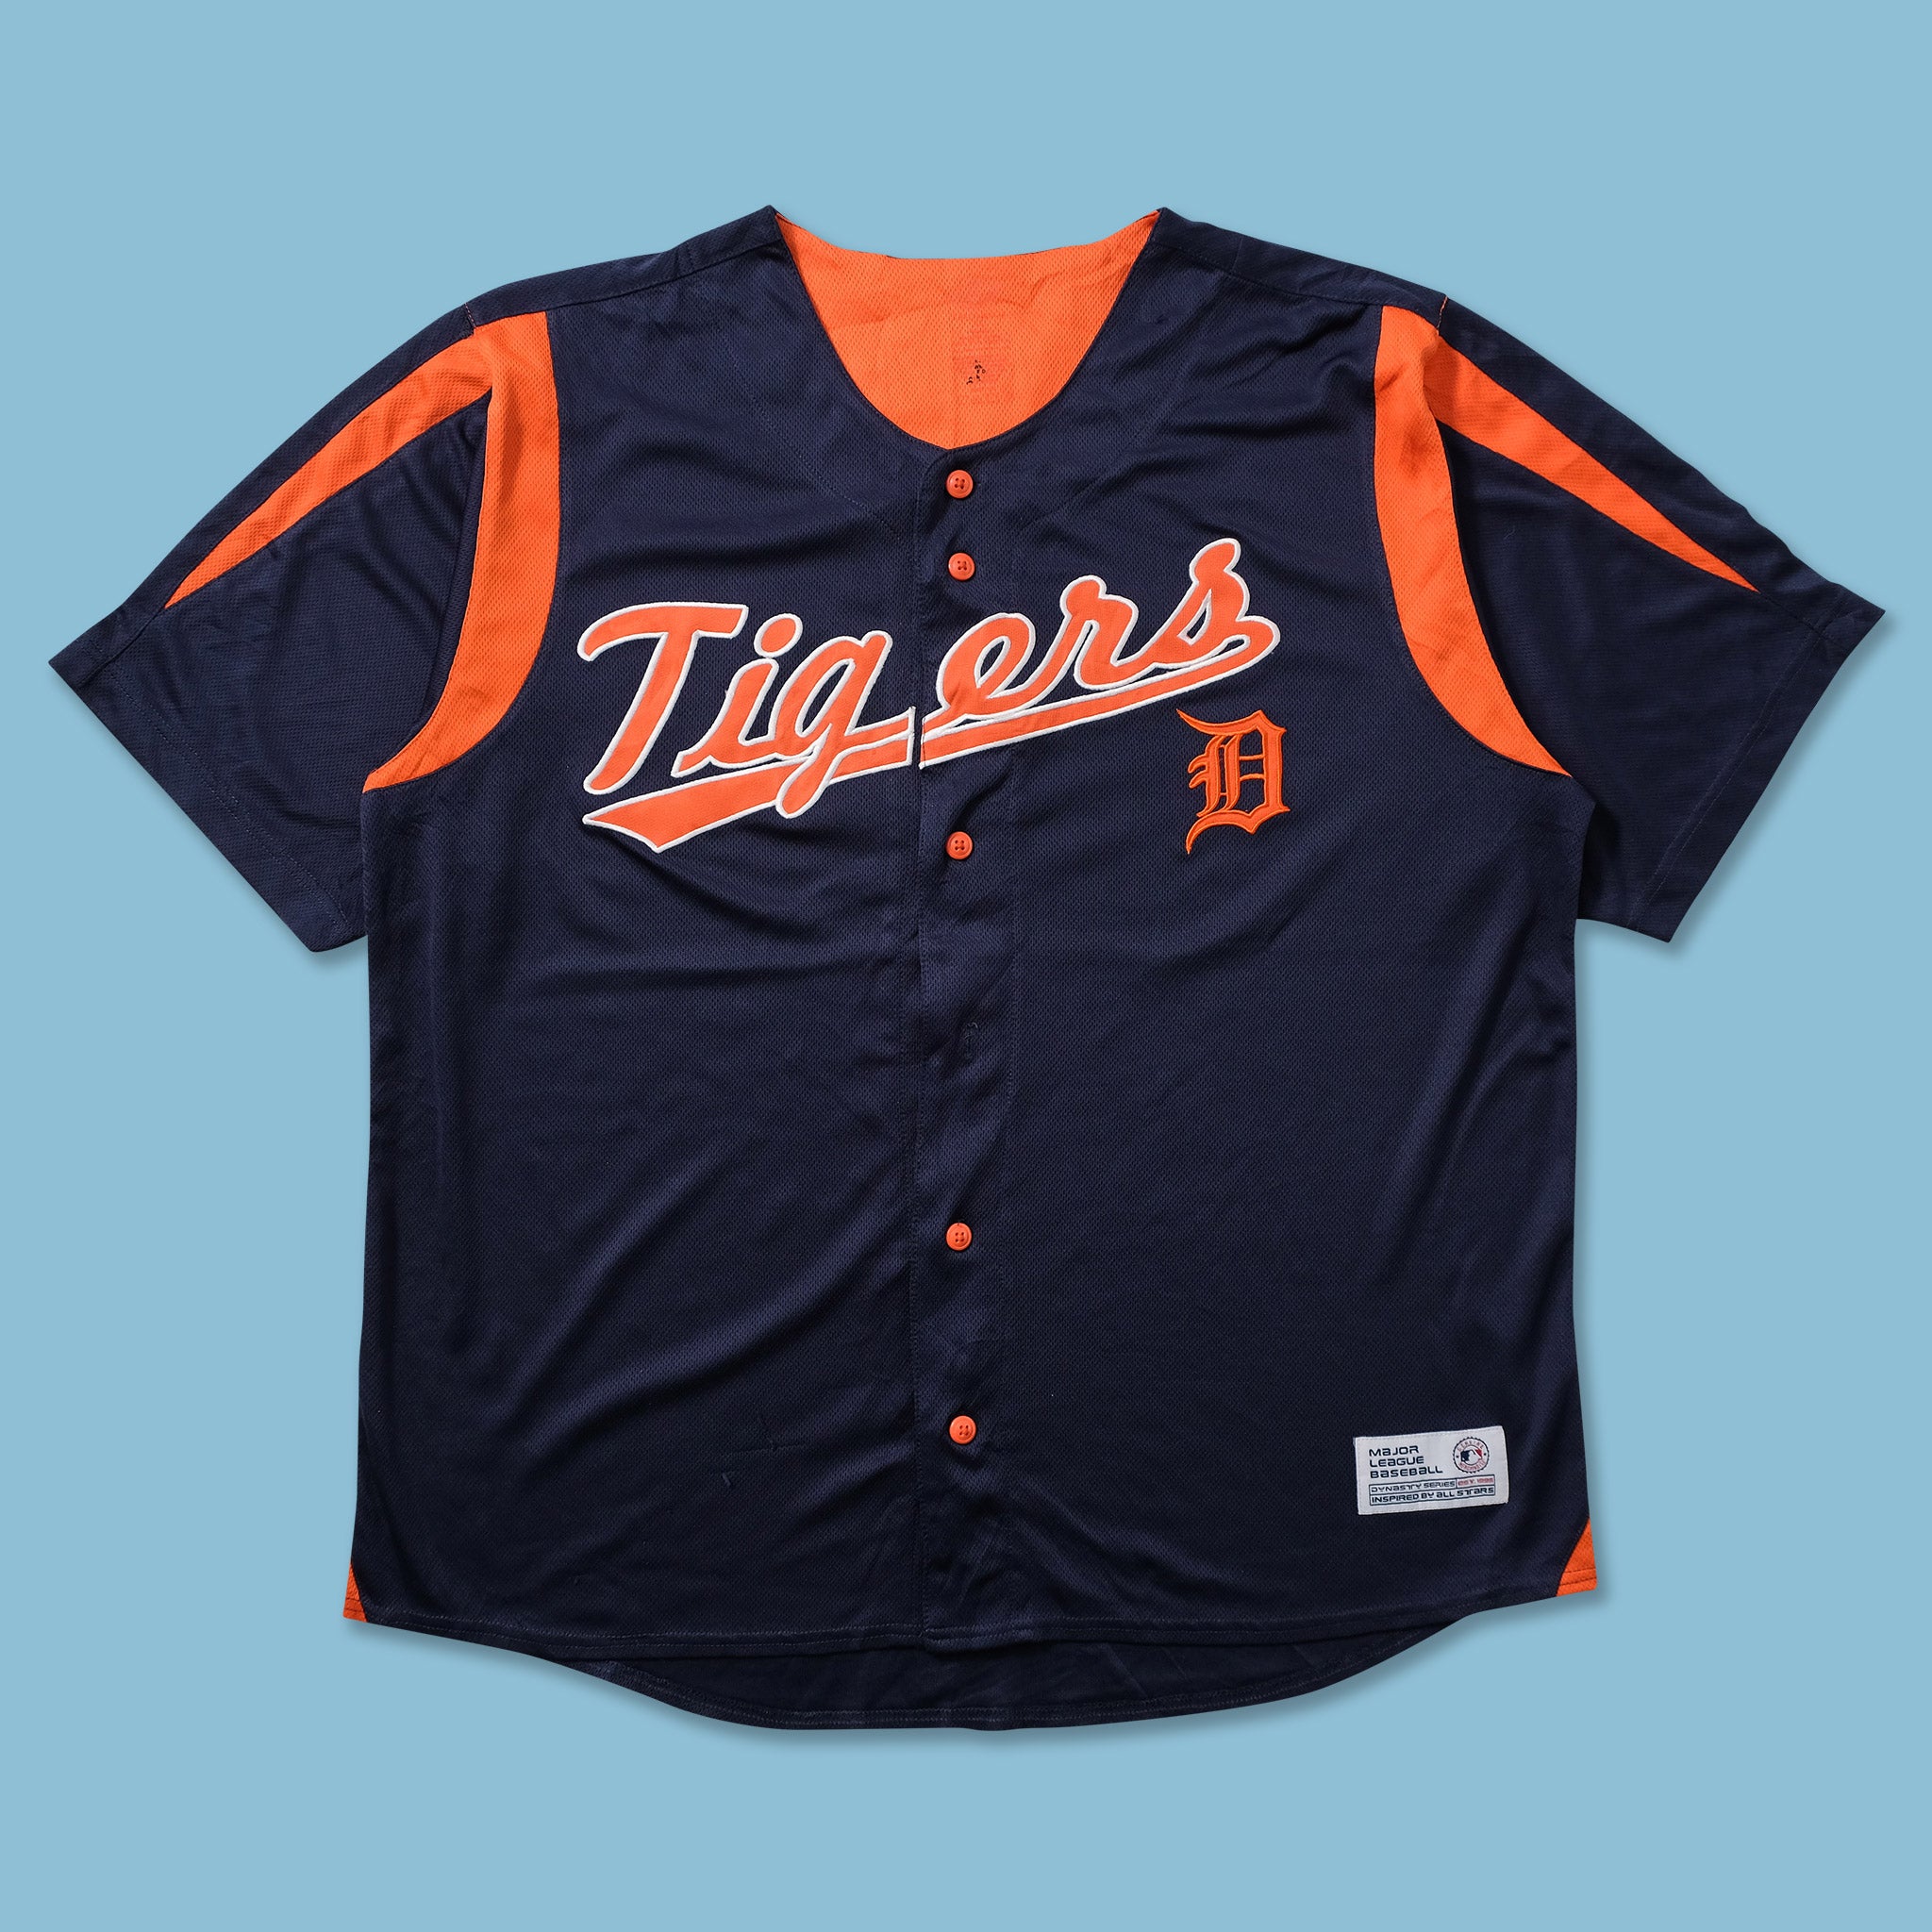 Replica Detroit Tigers Road Jersey, size XL, never worn